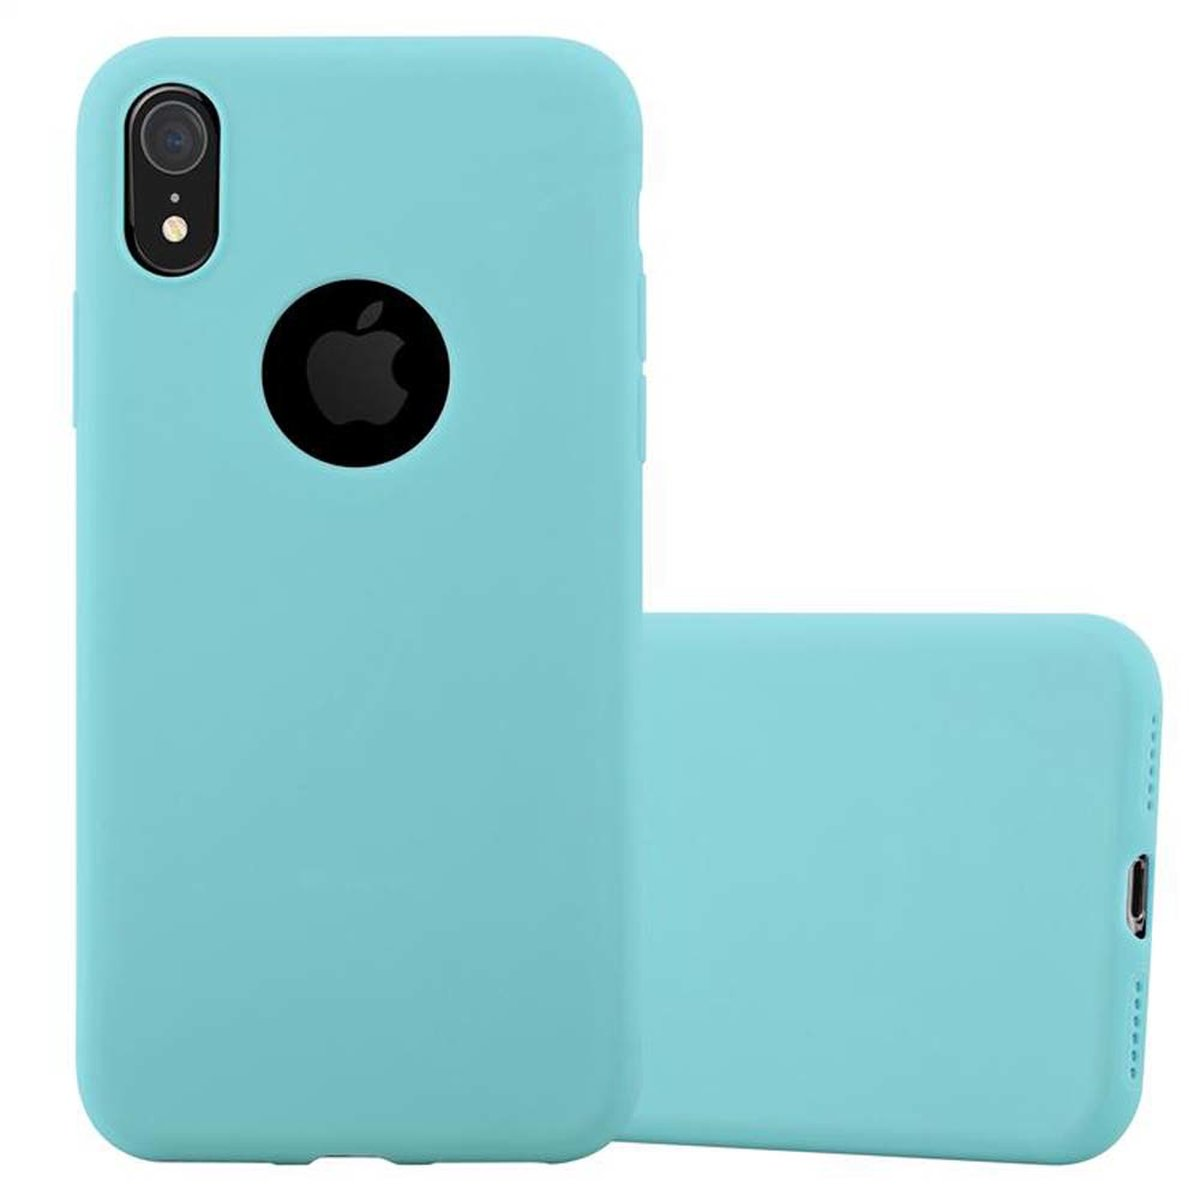 Style, XR, CADORABO Candy im Backcover, iPhone Hülle TPU CANDY BLAU Apple,